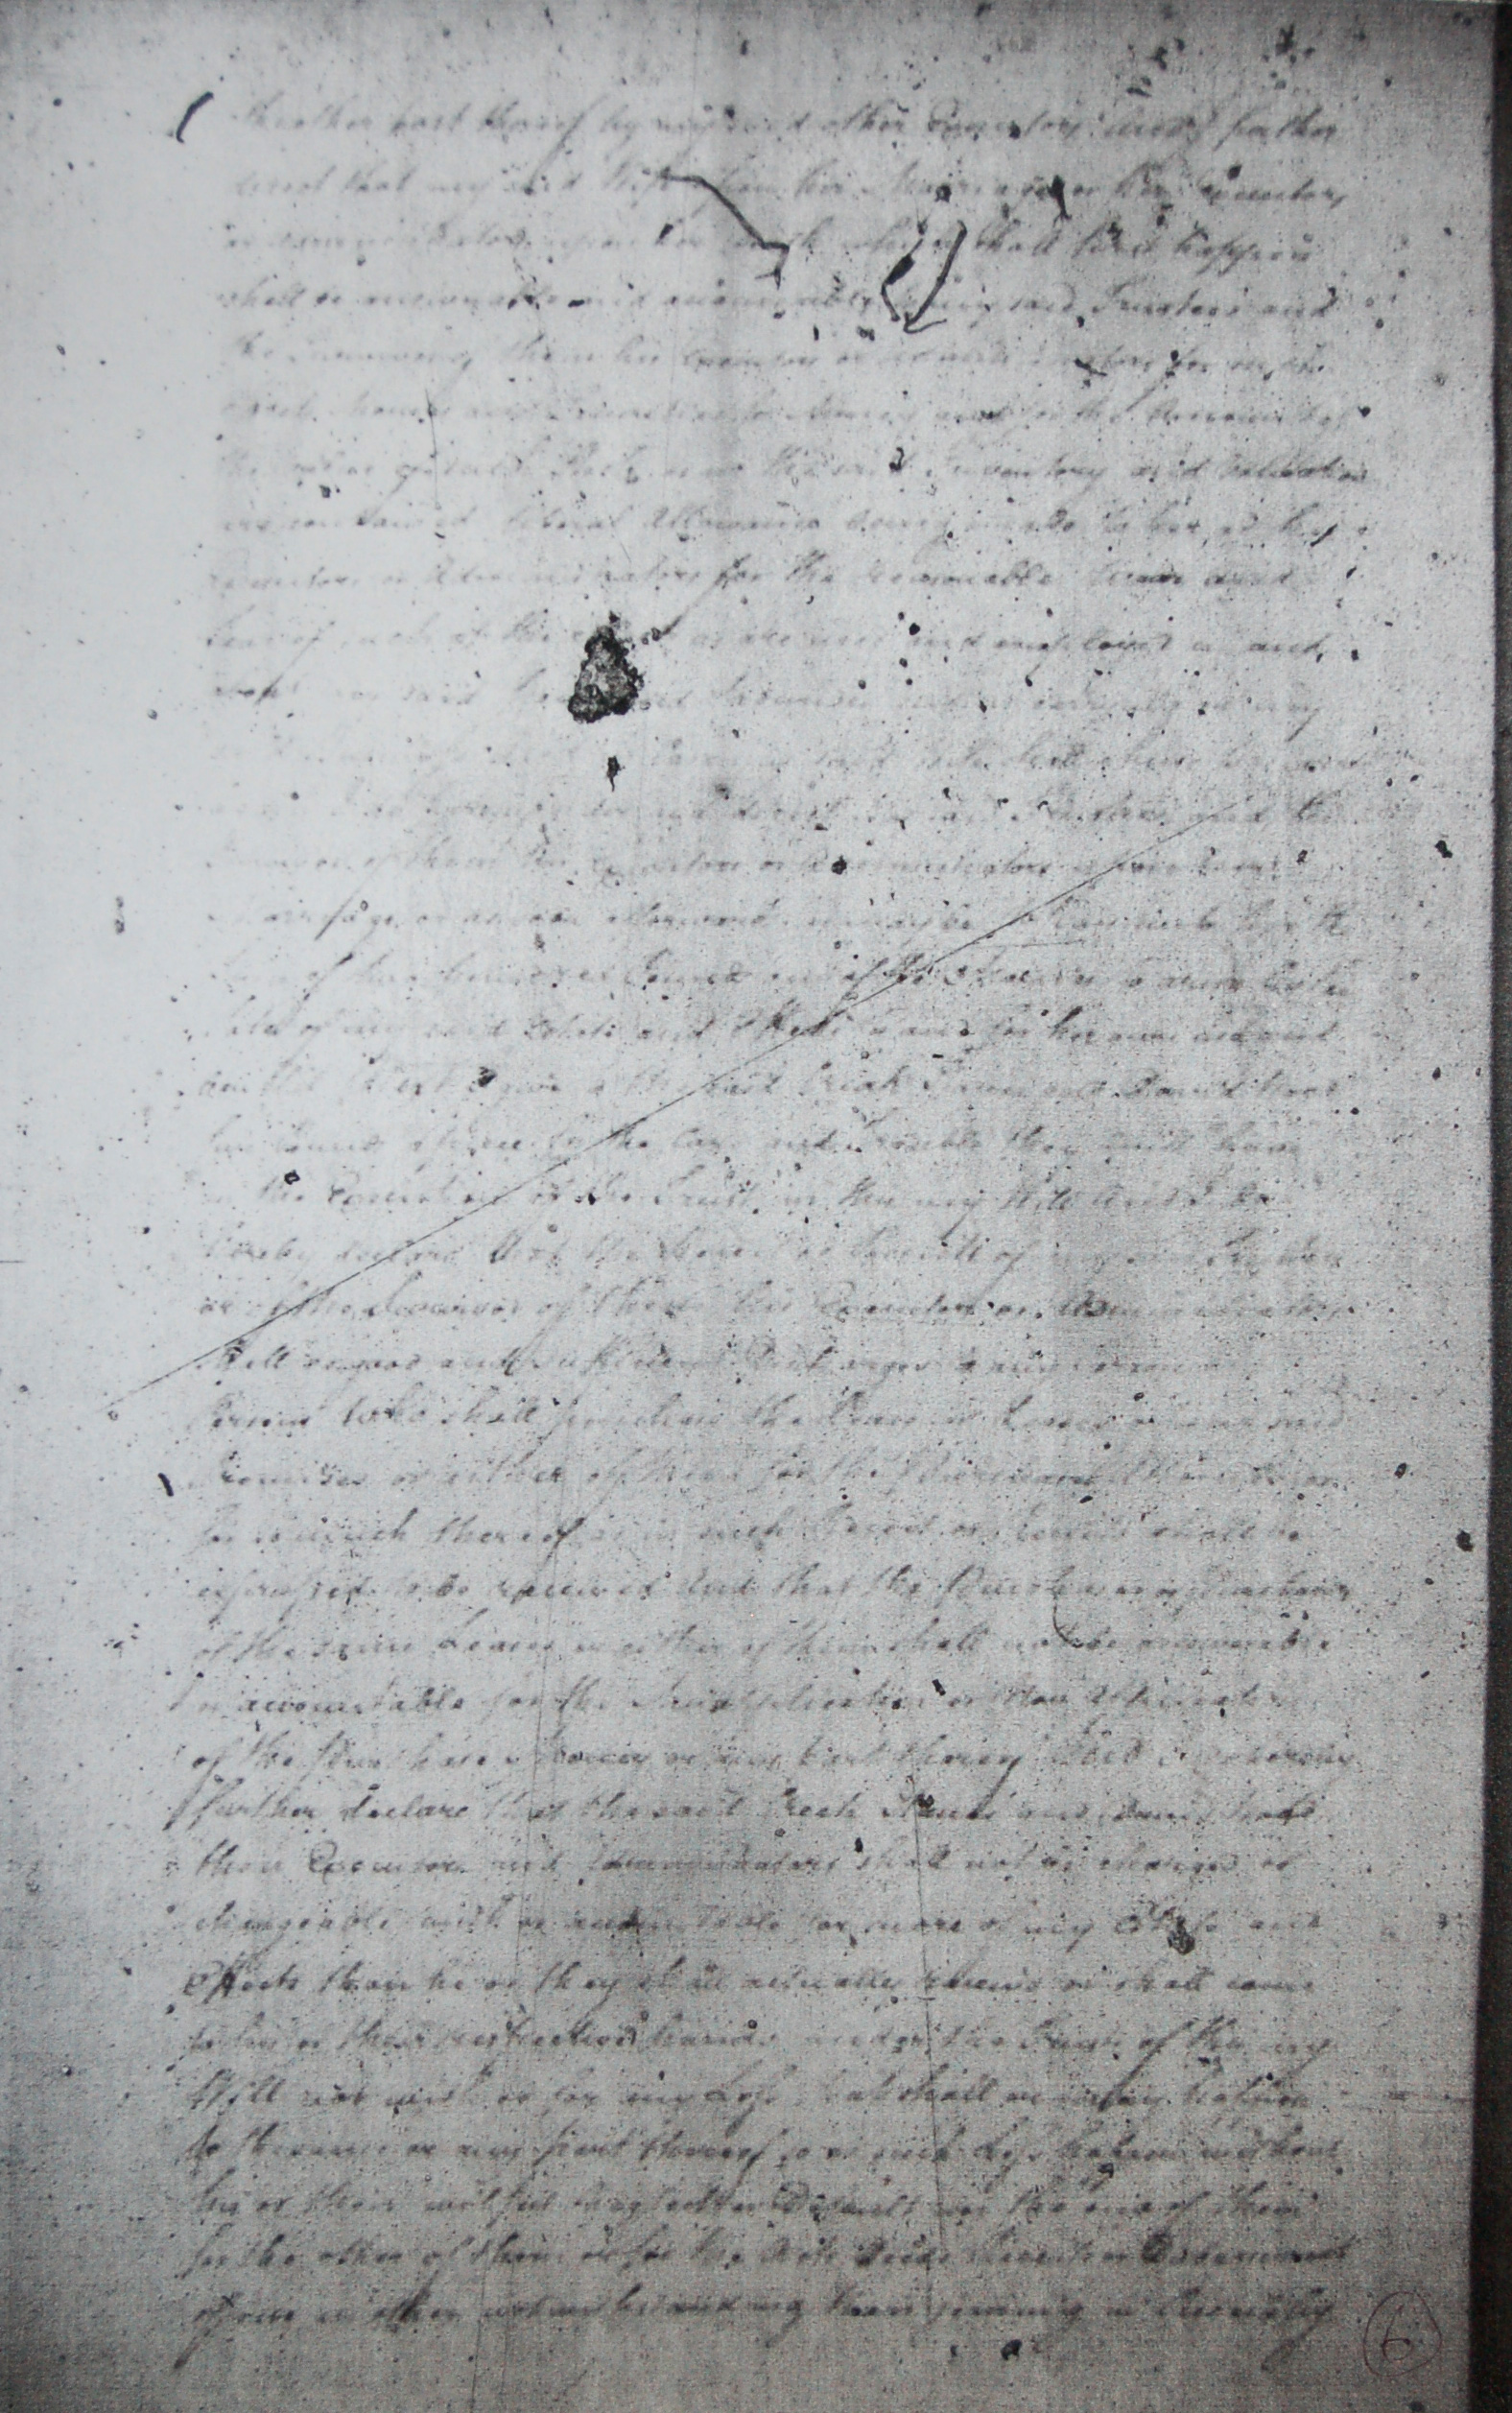 The will of Richard Balls, 1798, page 6